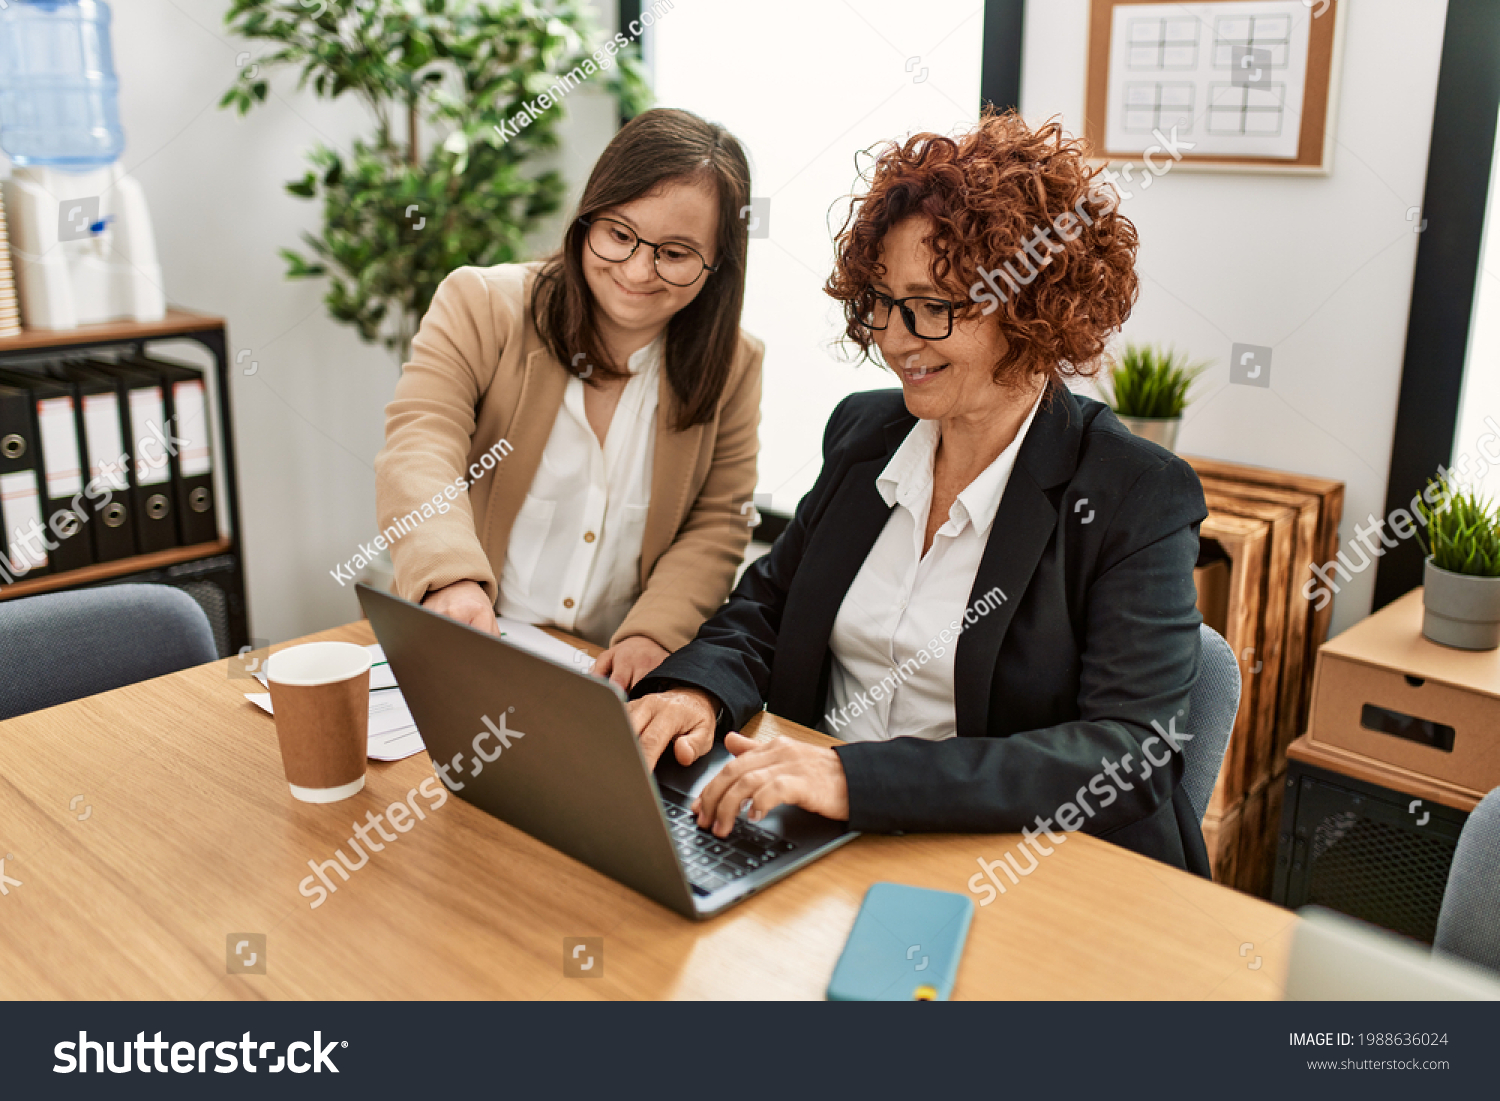 Group of two women working at the office. Mature woman and down syndrome girl working at inclusive teamwork. #1988636024